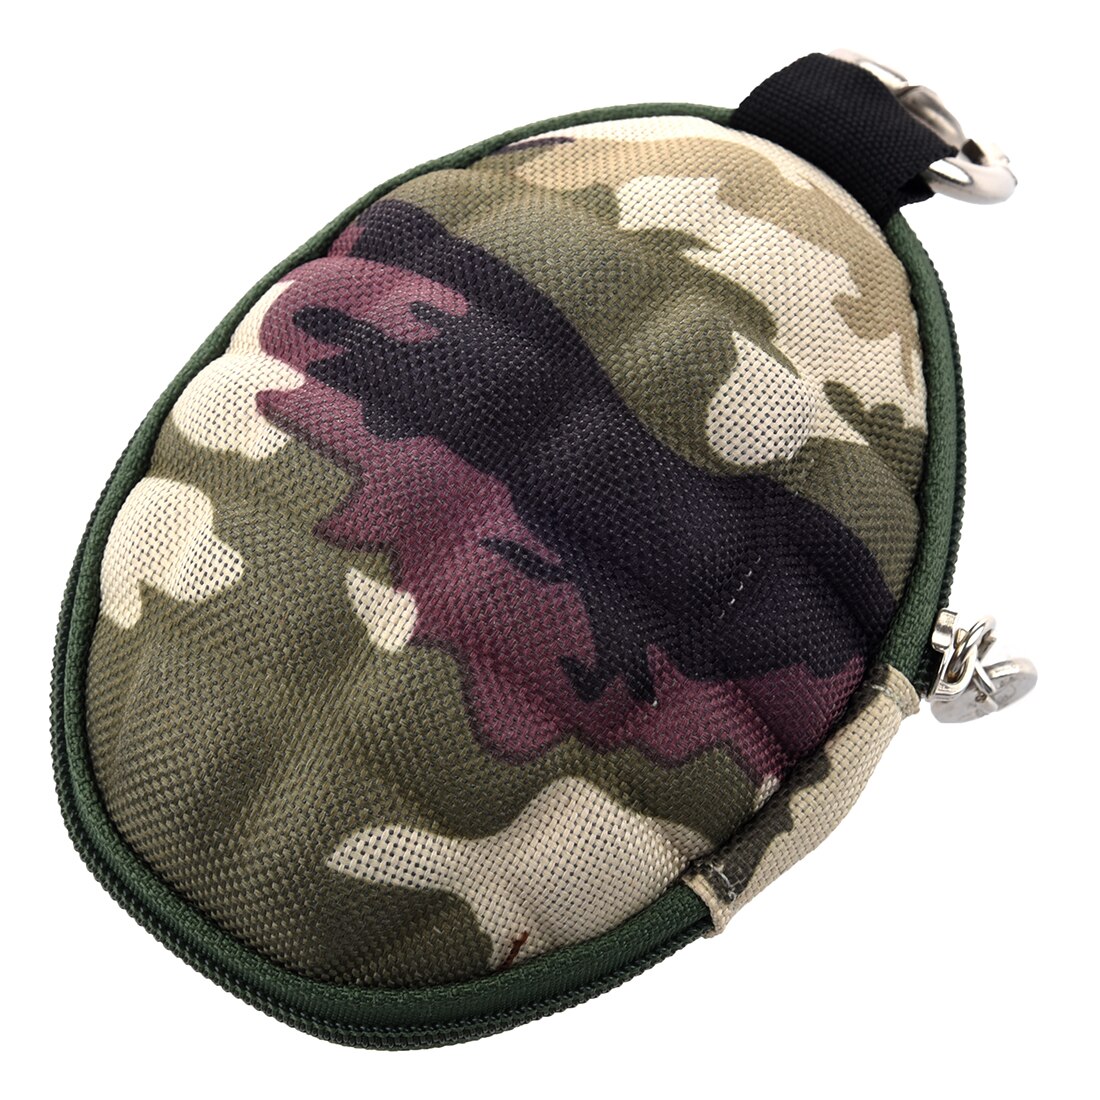 Camouflage Key & Coin Case Duck coin case / key case / Pass Case carabiner typ With six consecutive hook - ebowsos